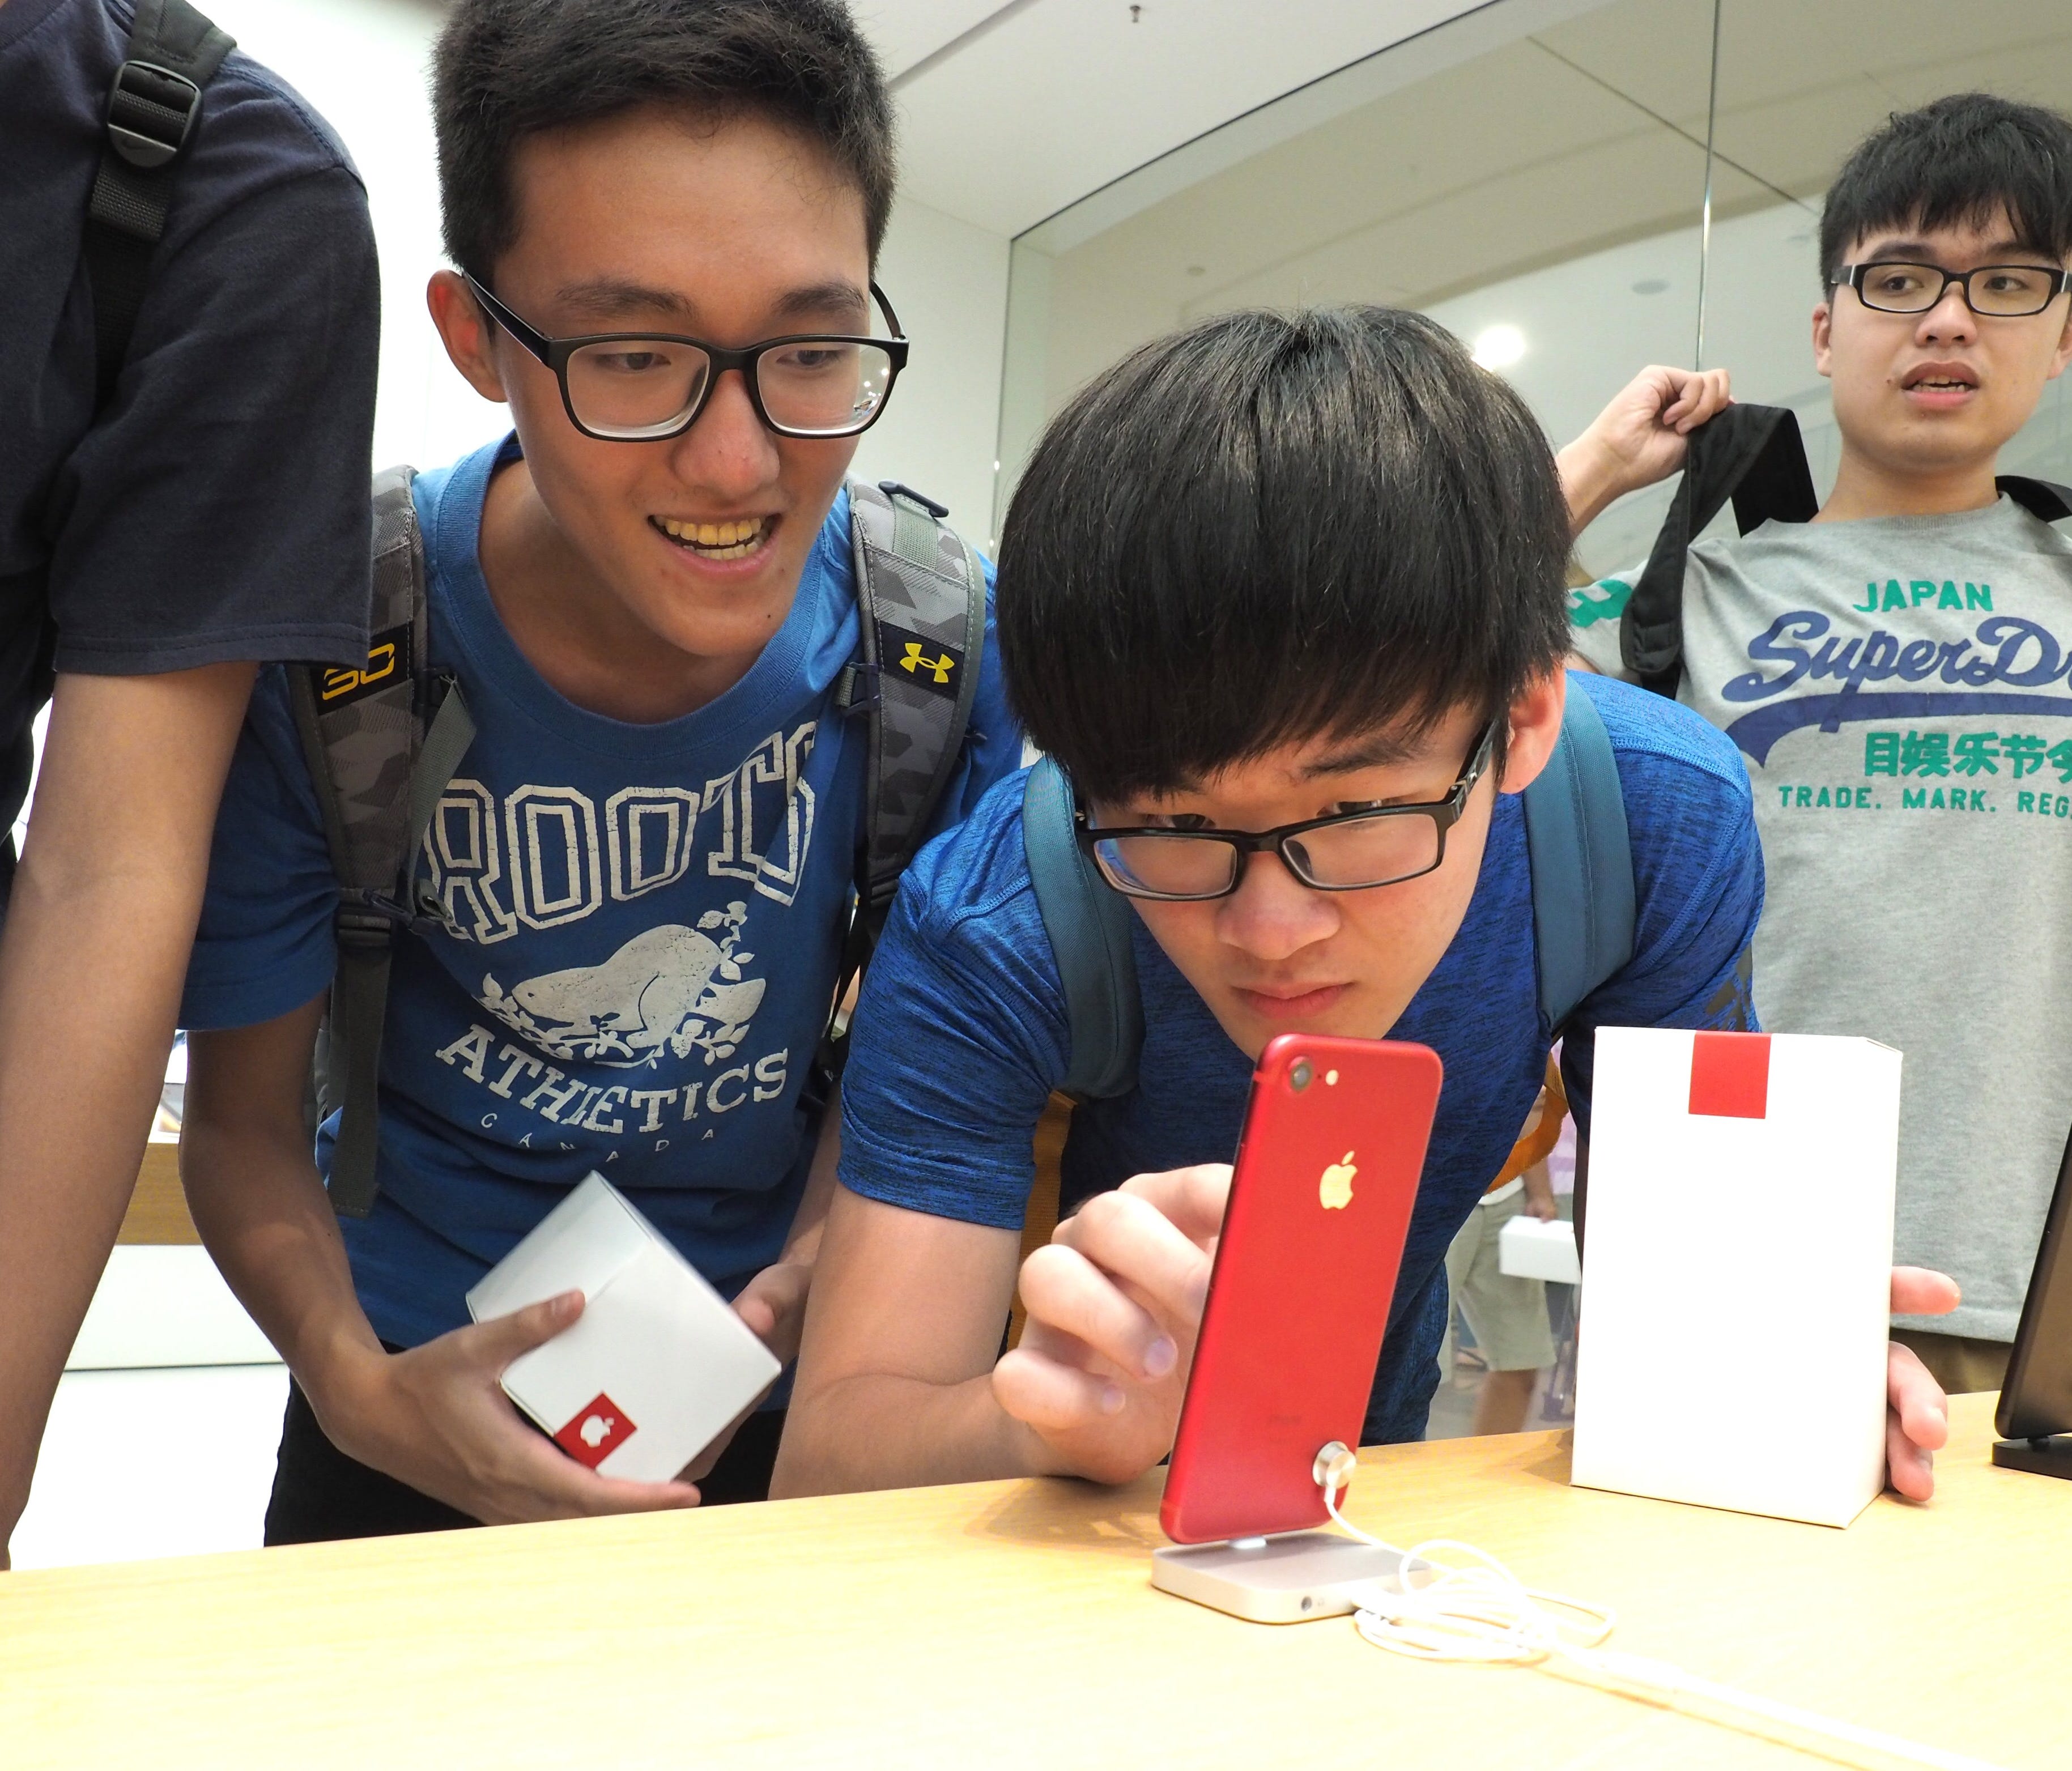 Students look at an iPhone at the Apple Store in the Taipei 101 skyscraper in Taipei, Taiwan.